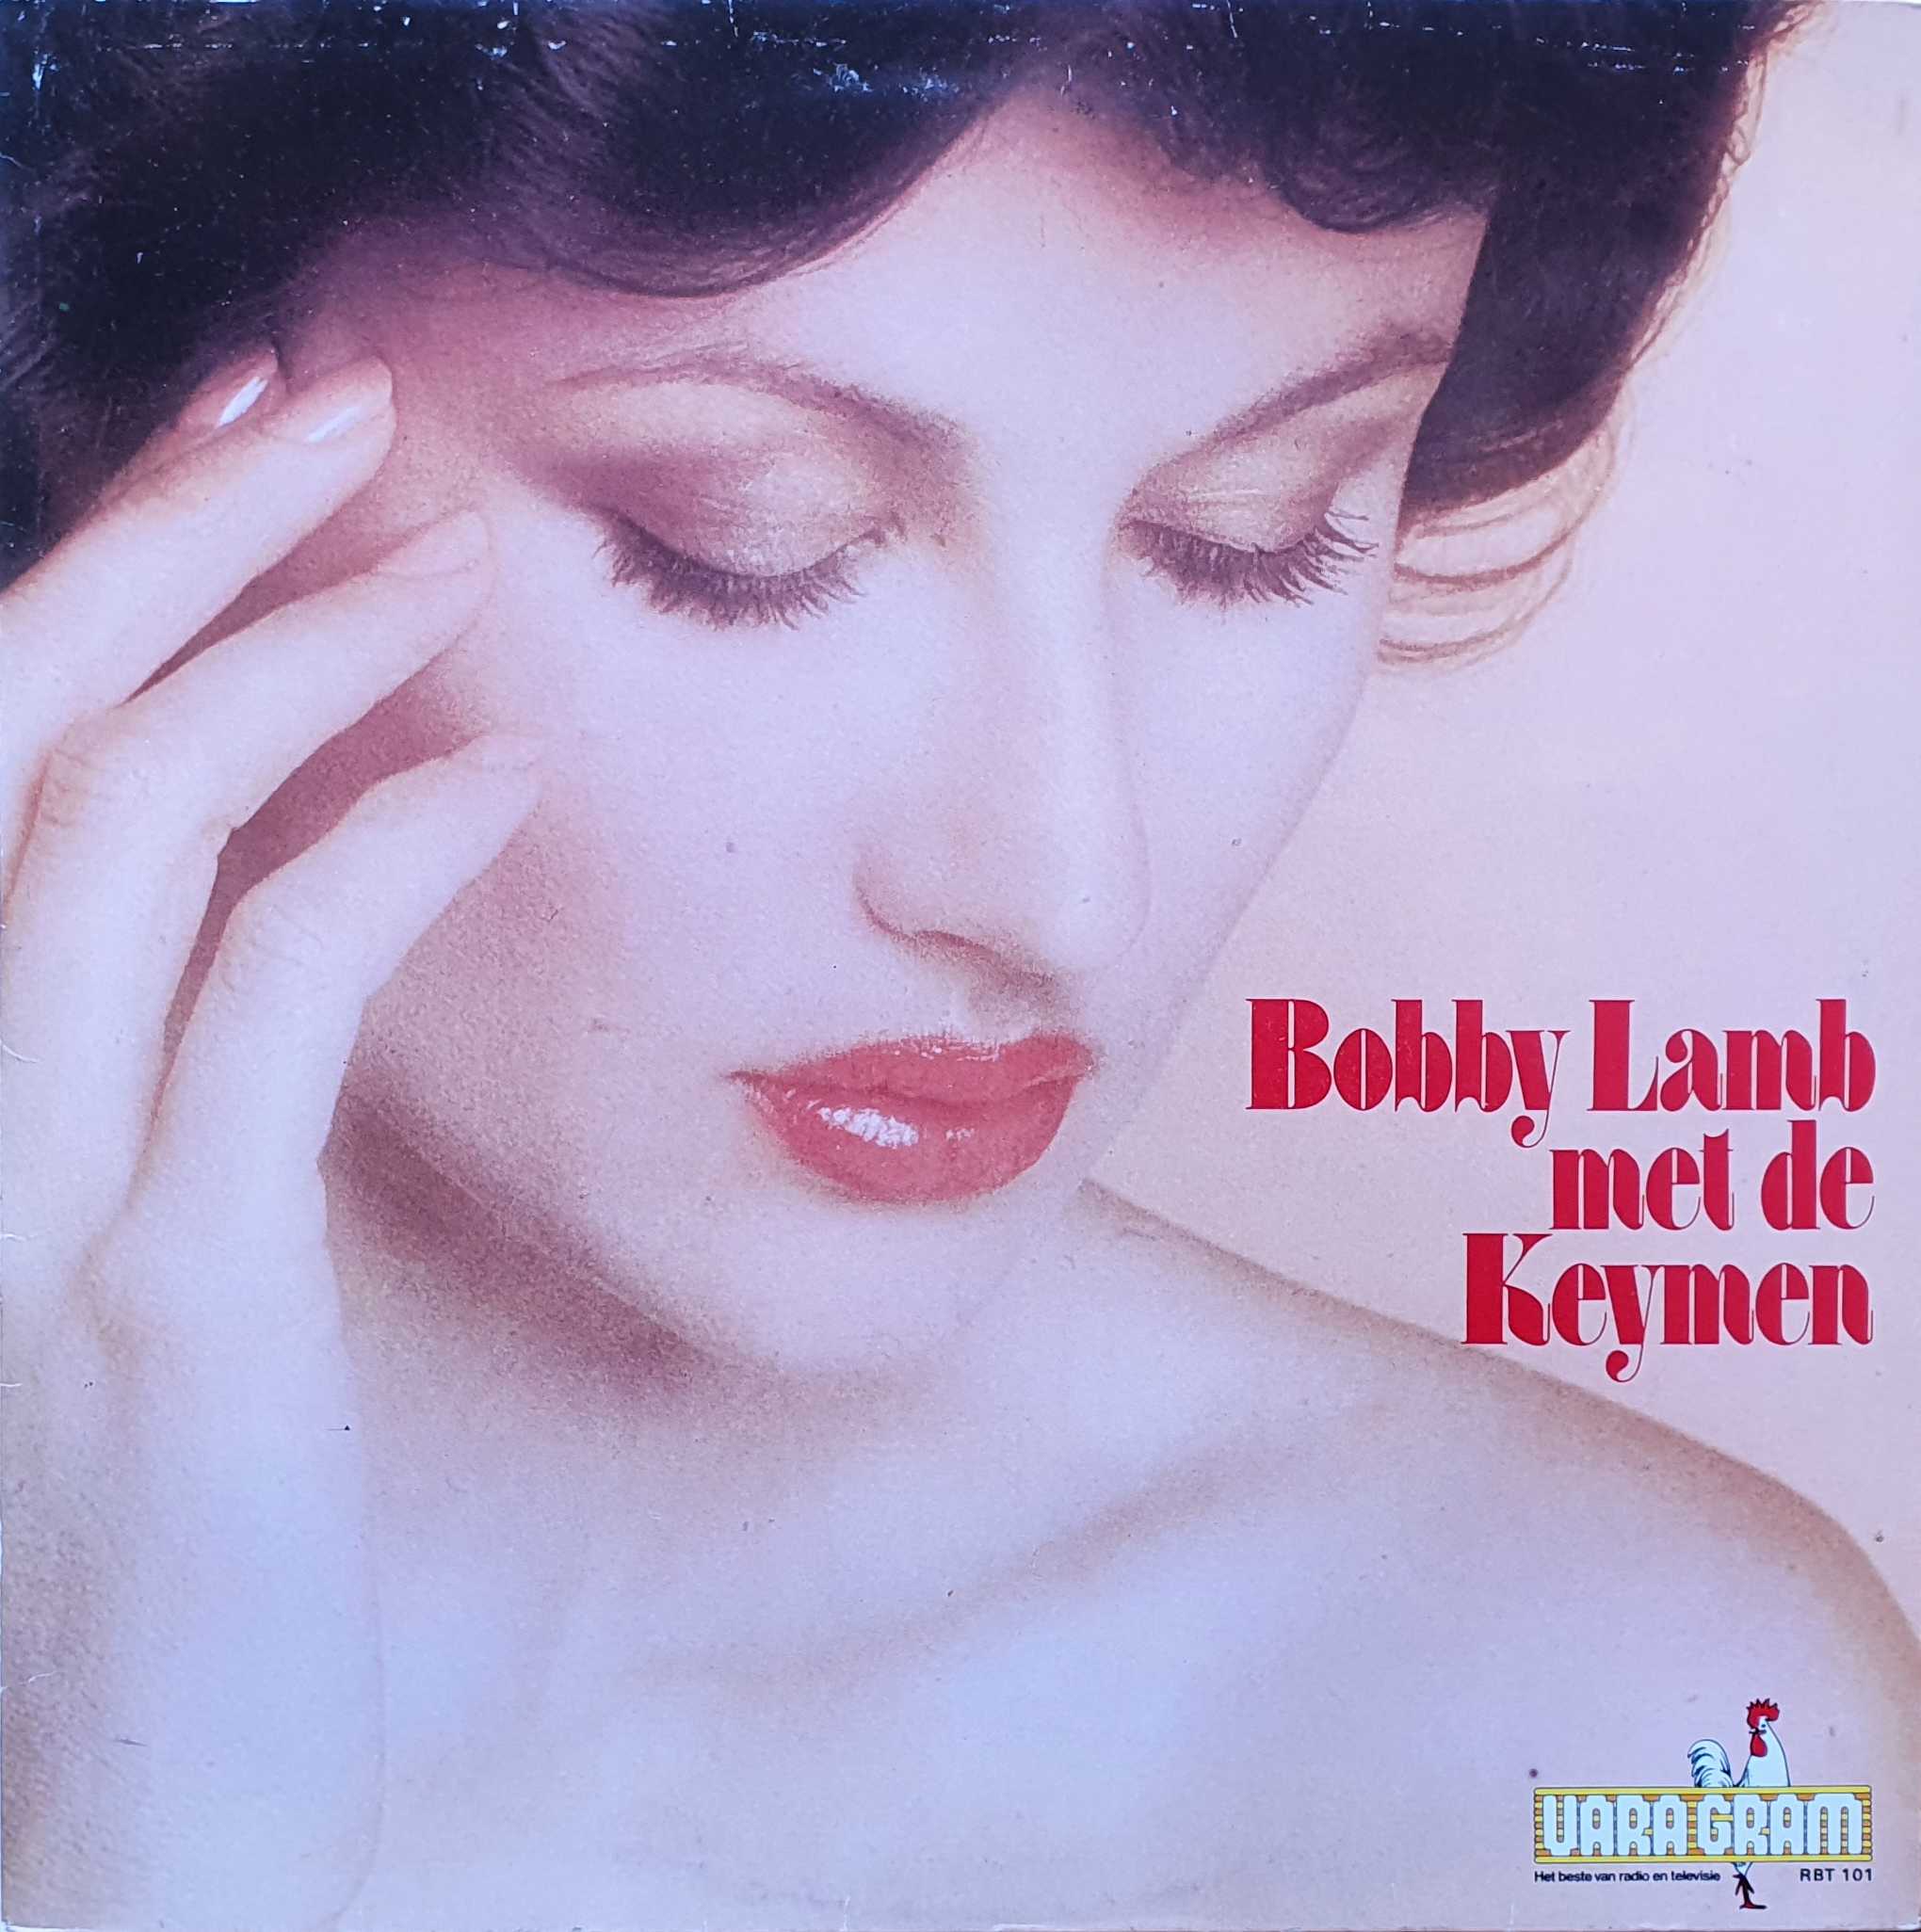 Picture of RBT 101-iD Bobby, Lamb met de Keymen (Dutch import) by artist Various from the BBC albums - Records and Tapes library